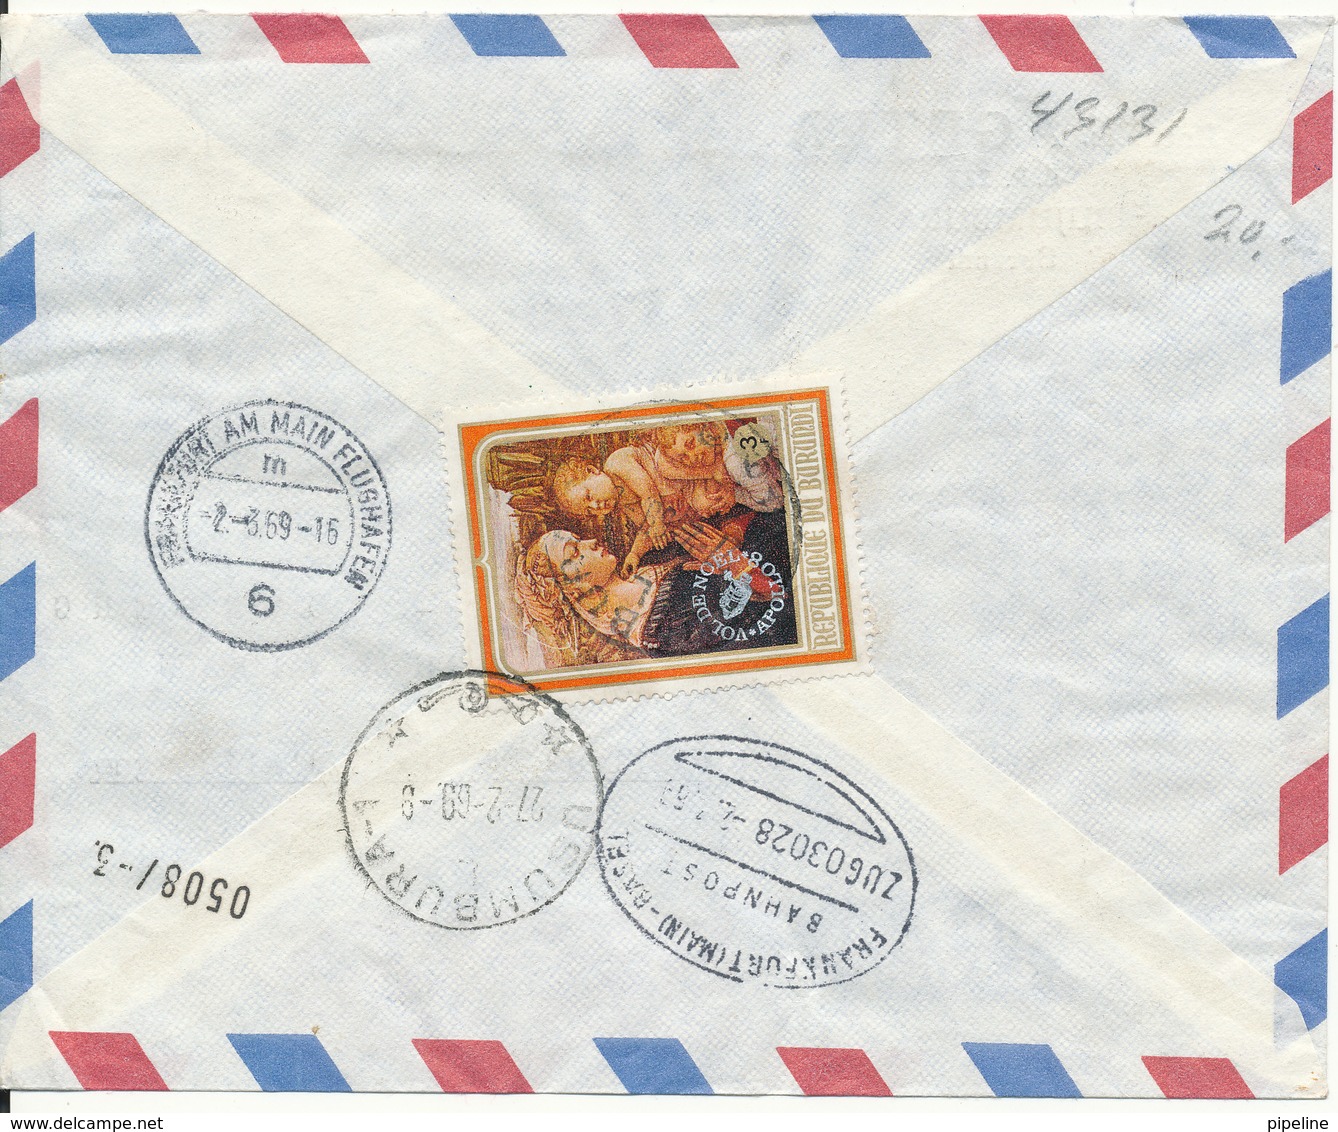 Burundi Registered Express Air Mail Cover Sent To Germany 27-2-1969 With Bahnpost Cancel On Backside Of The Cover - Used Stamps